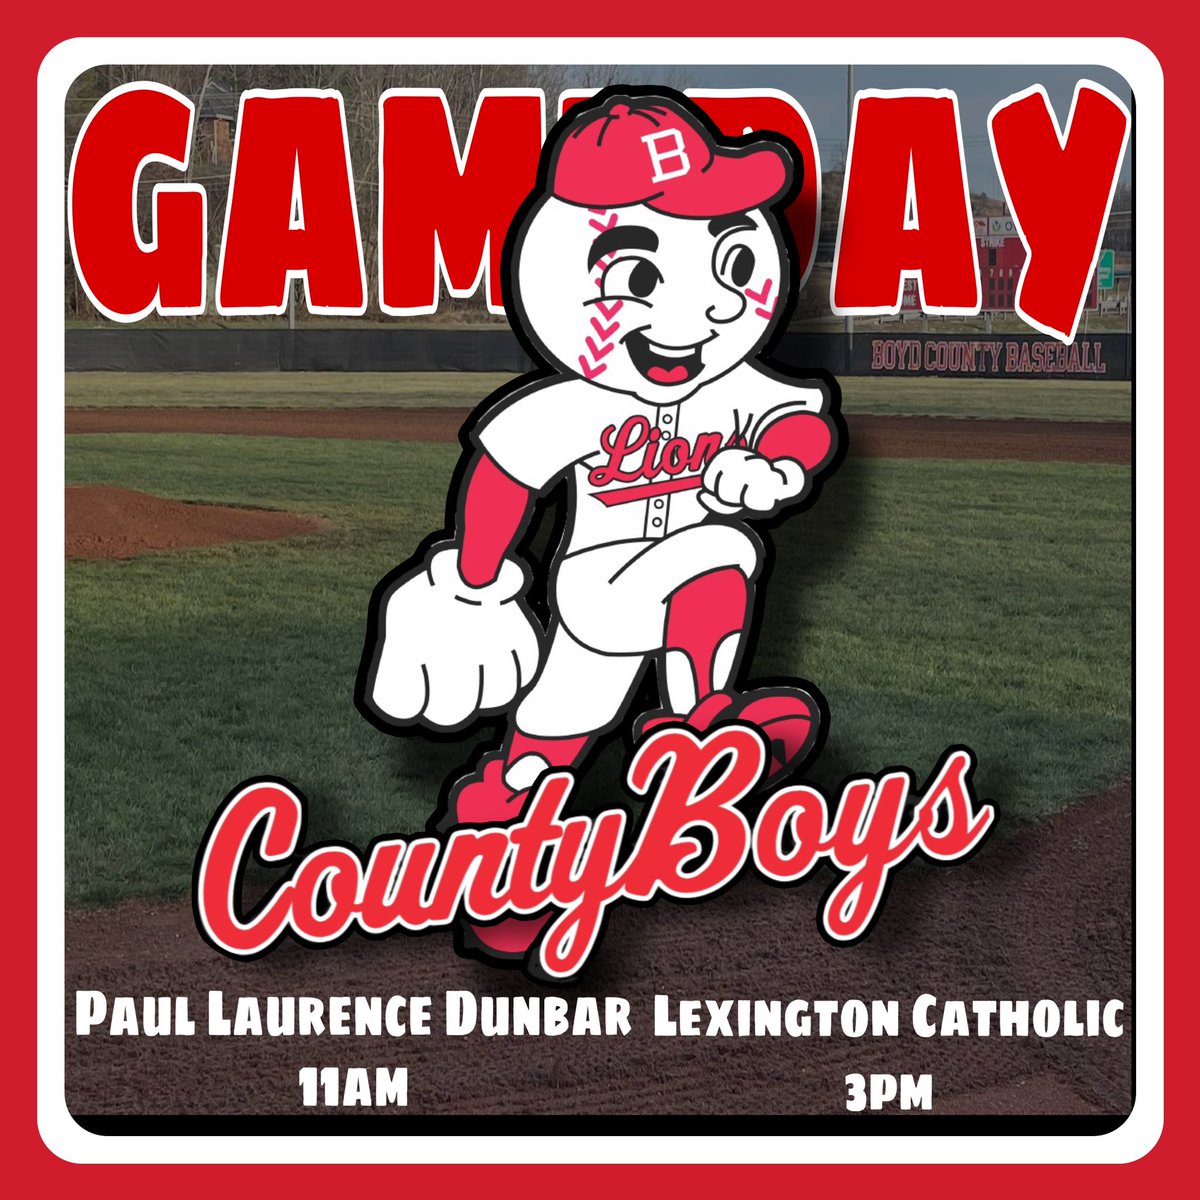 The #CountyBoys are finally back in action after a week off from Spring Training, with 2 games in Lexington. They travel to PLD at 11 and then over to Lex Cath at 3.